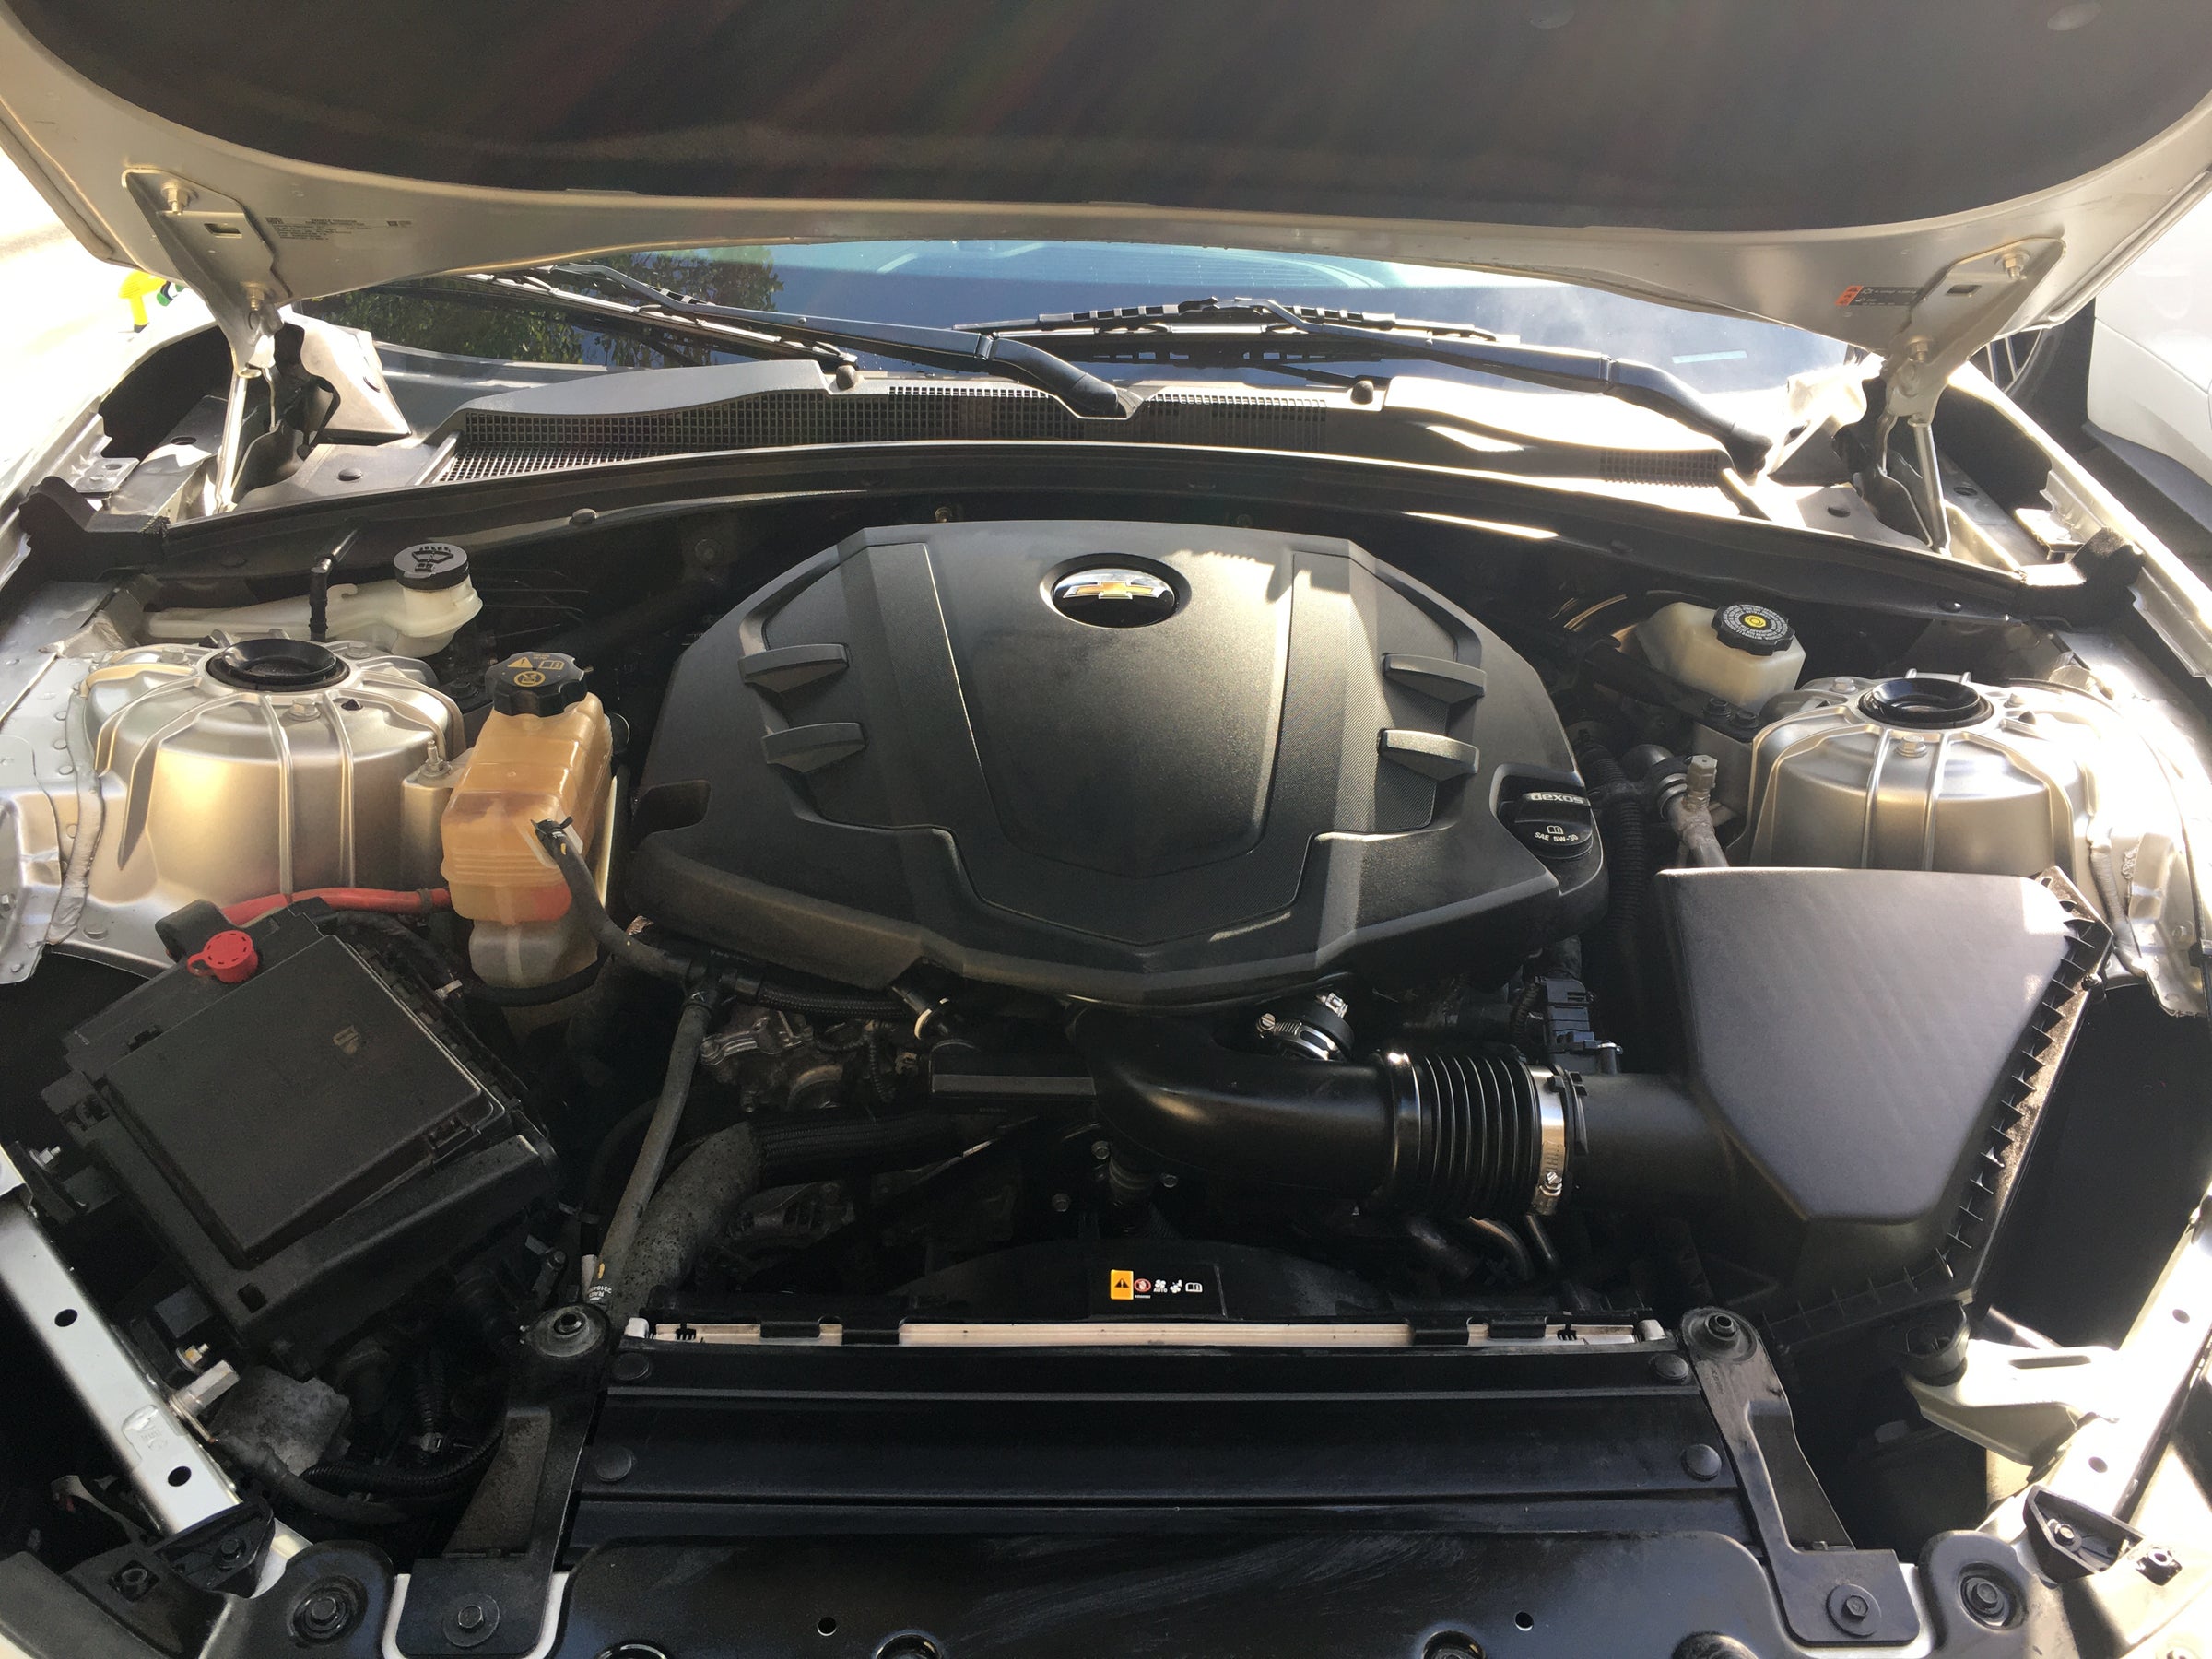 Engine compartment questions